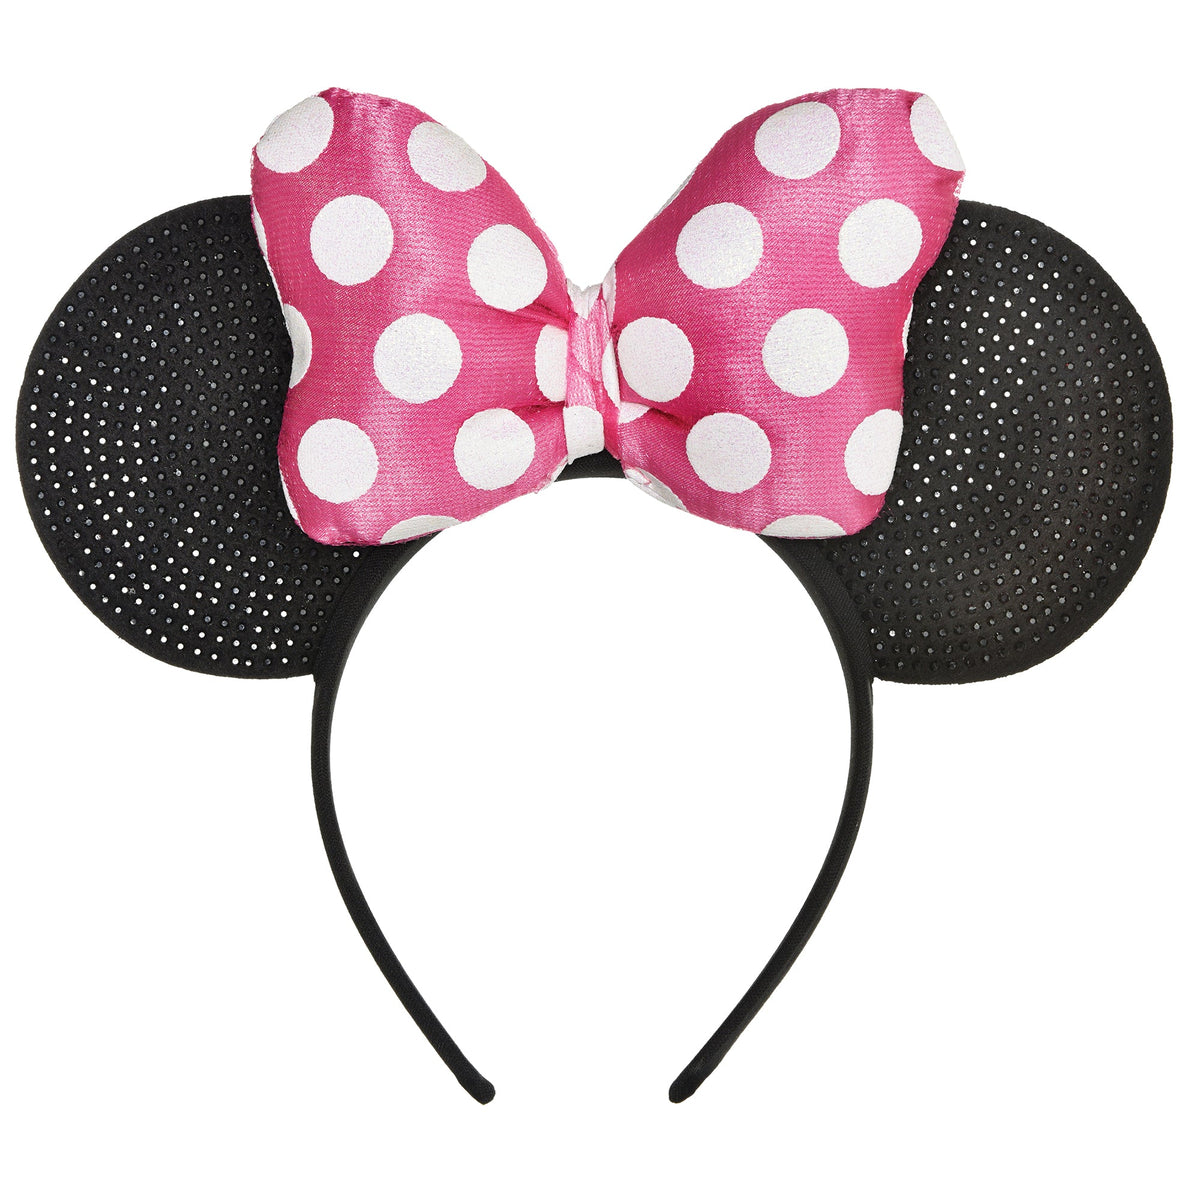 Minnie Mouse Forever Deluxe  9 1/2" x 8"  Headband